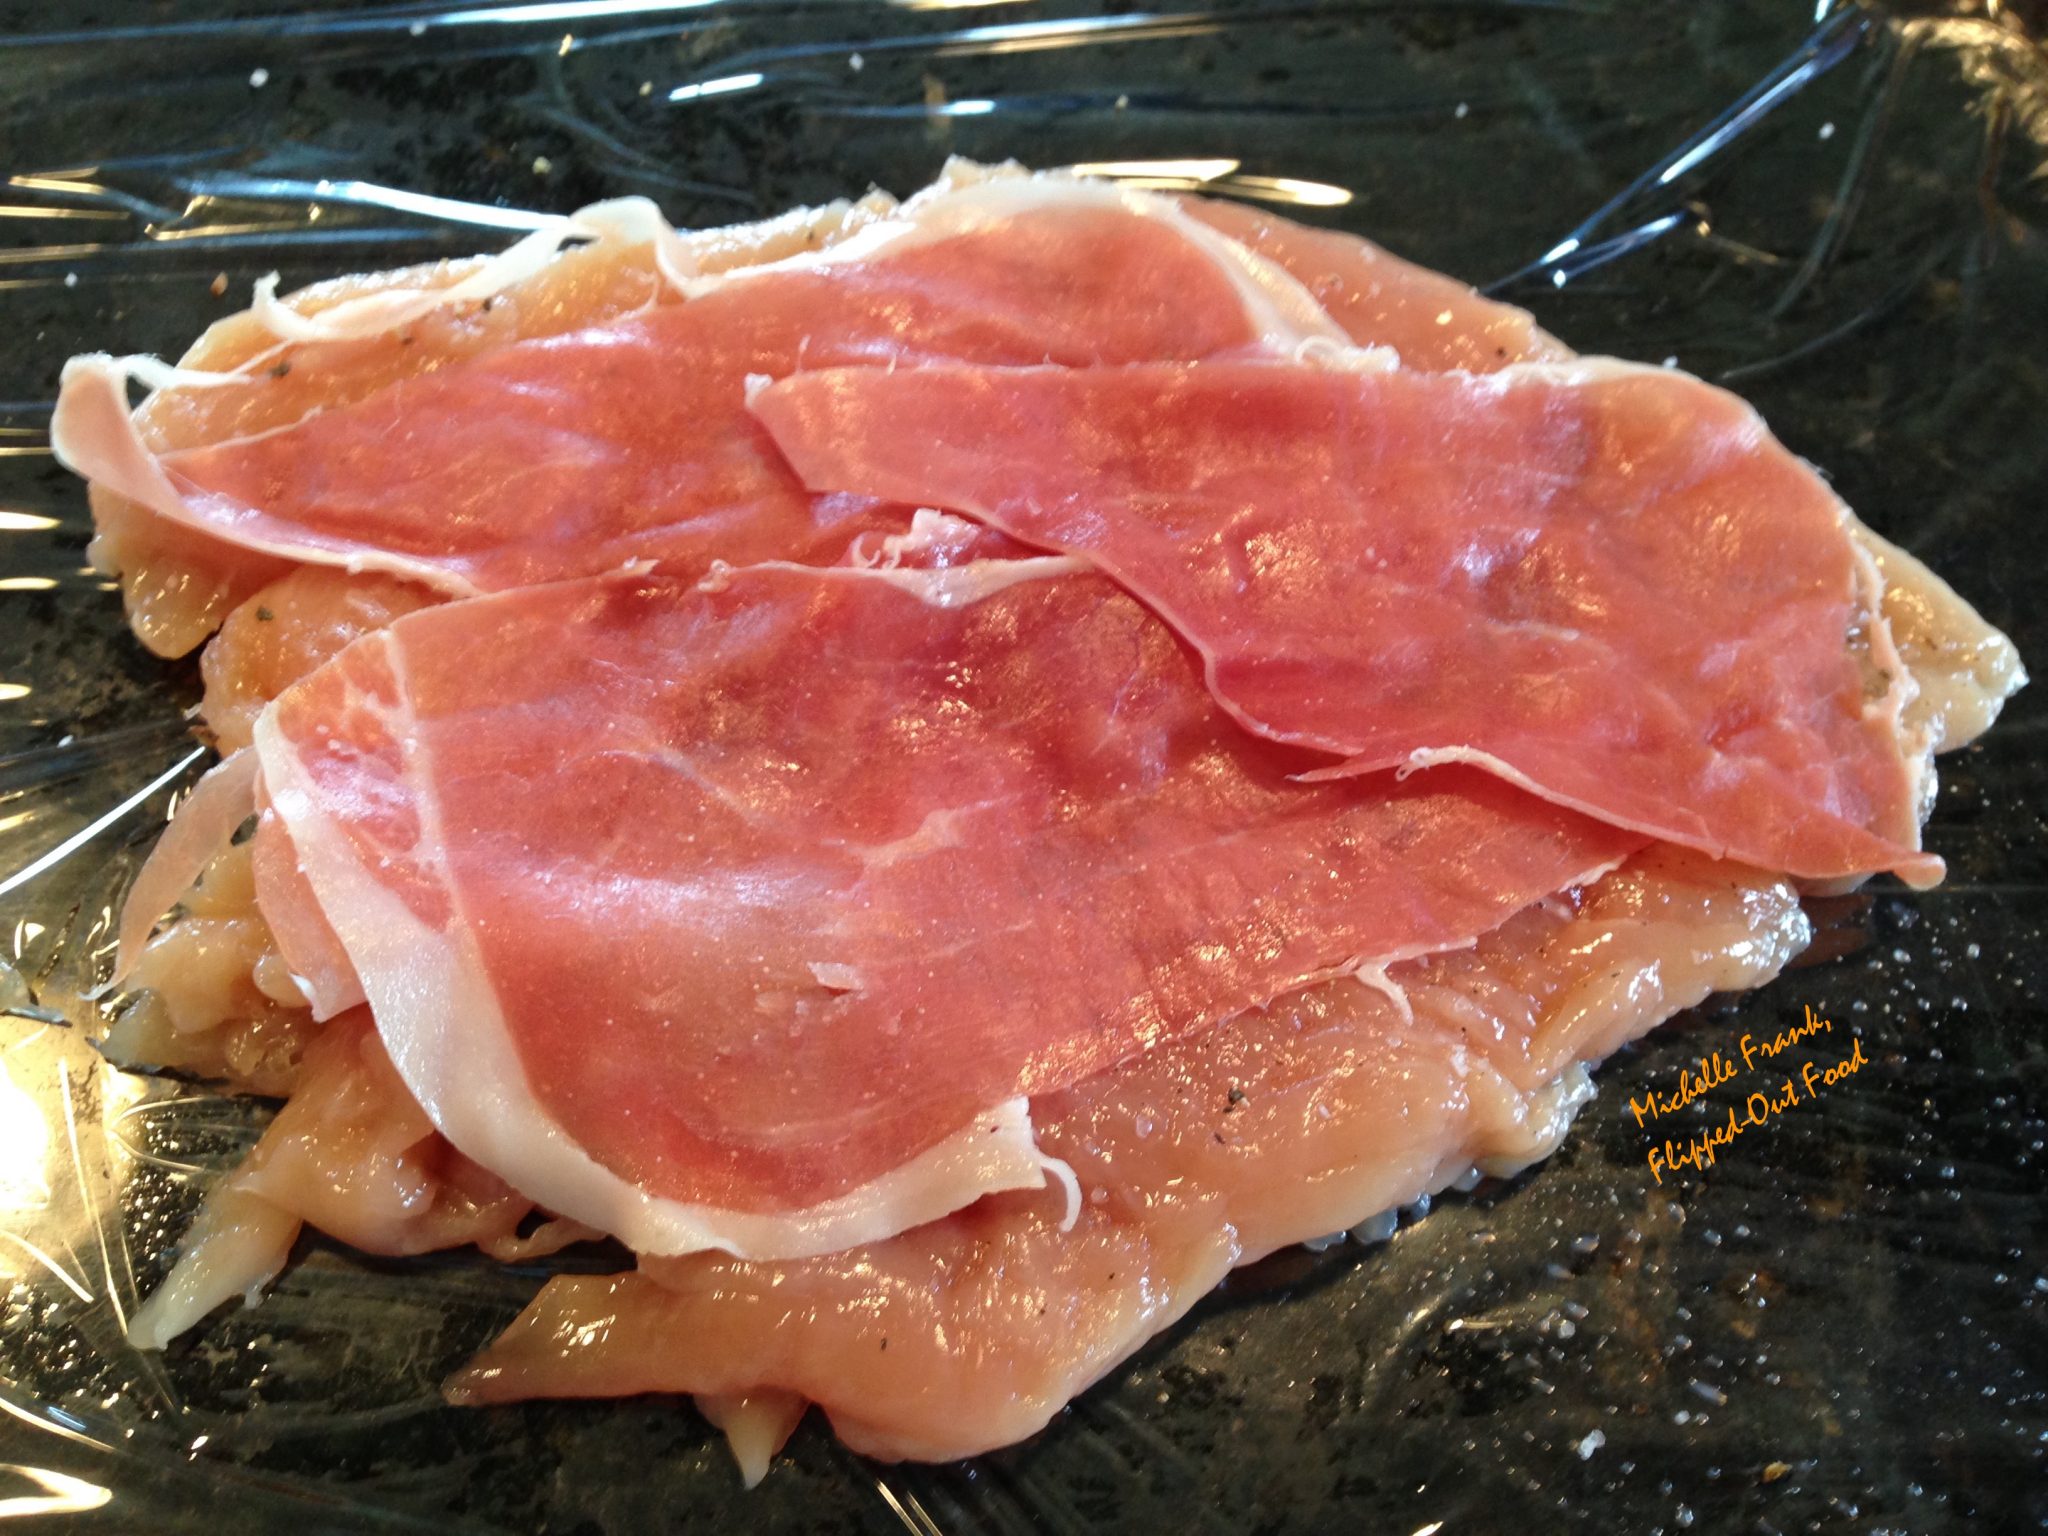 Arranging the prosciutto on the pounded out chicken breast for chicken rollatini.